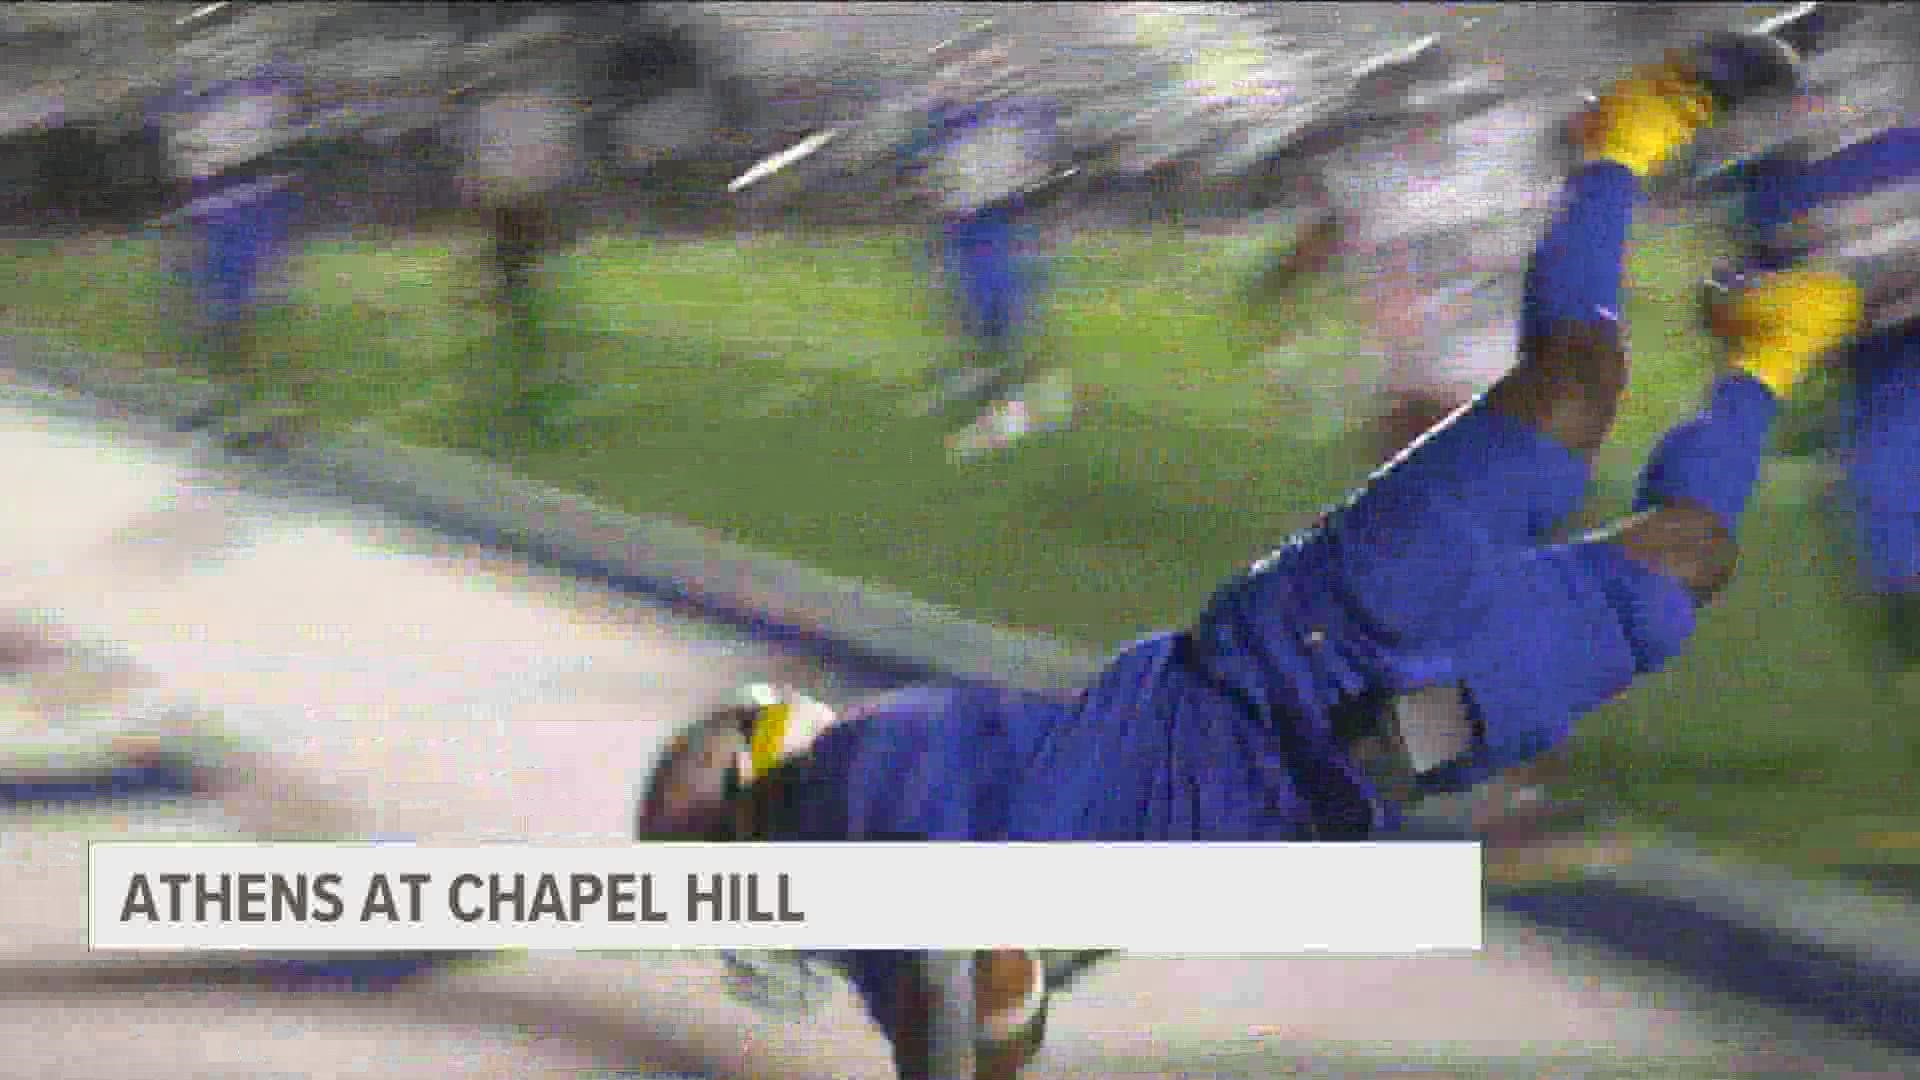 For more East Texas high school football highlights, visit CBS19.tv/Under-The-Lights.